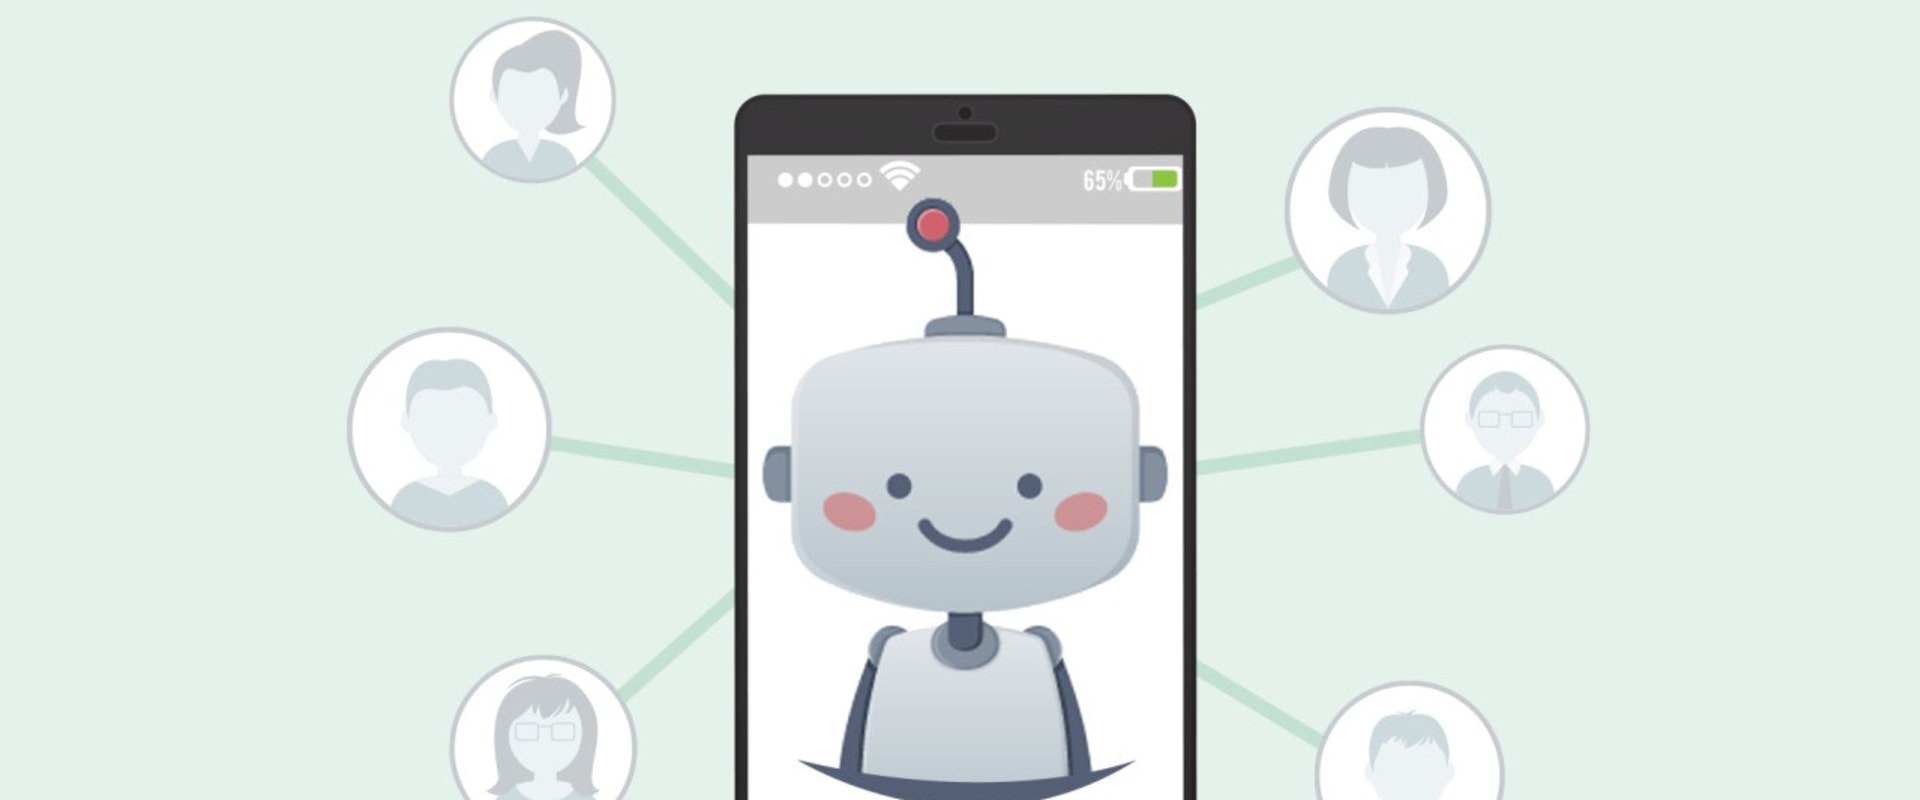 How do you use chatbots in digital marketing?